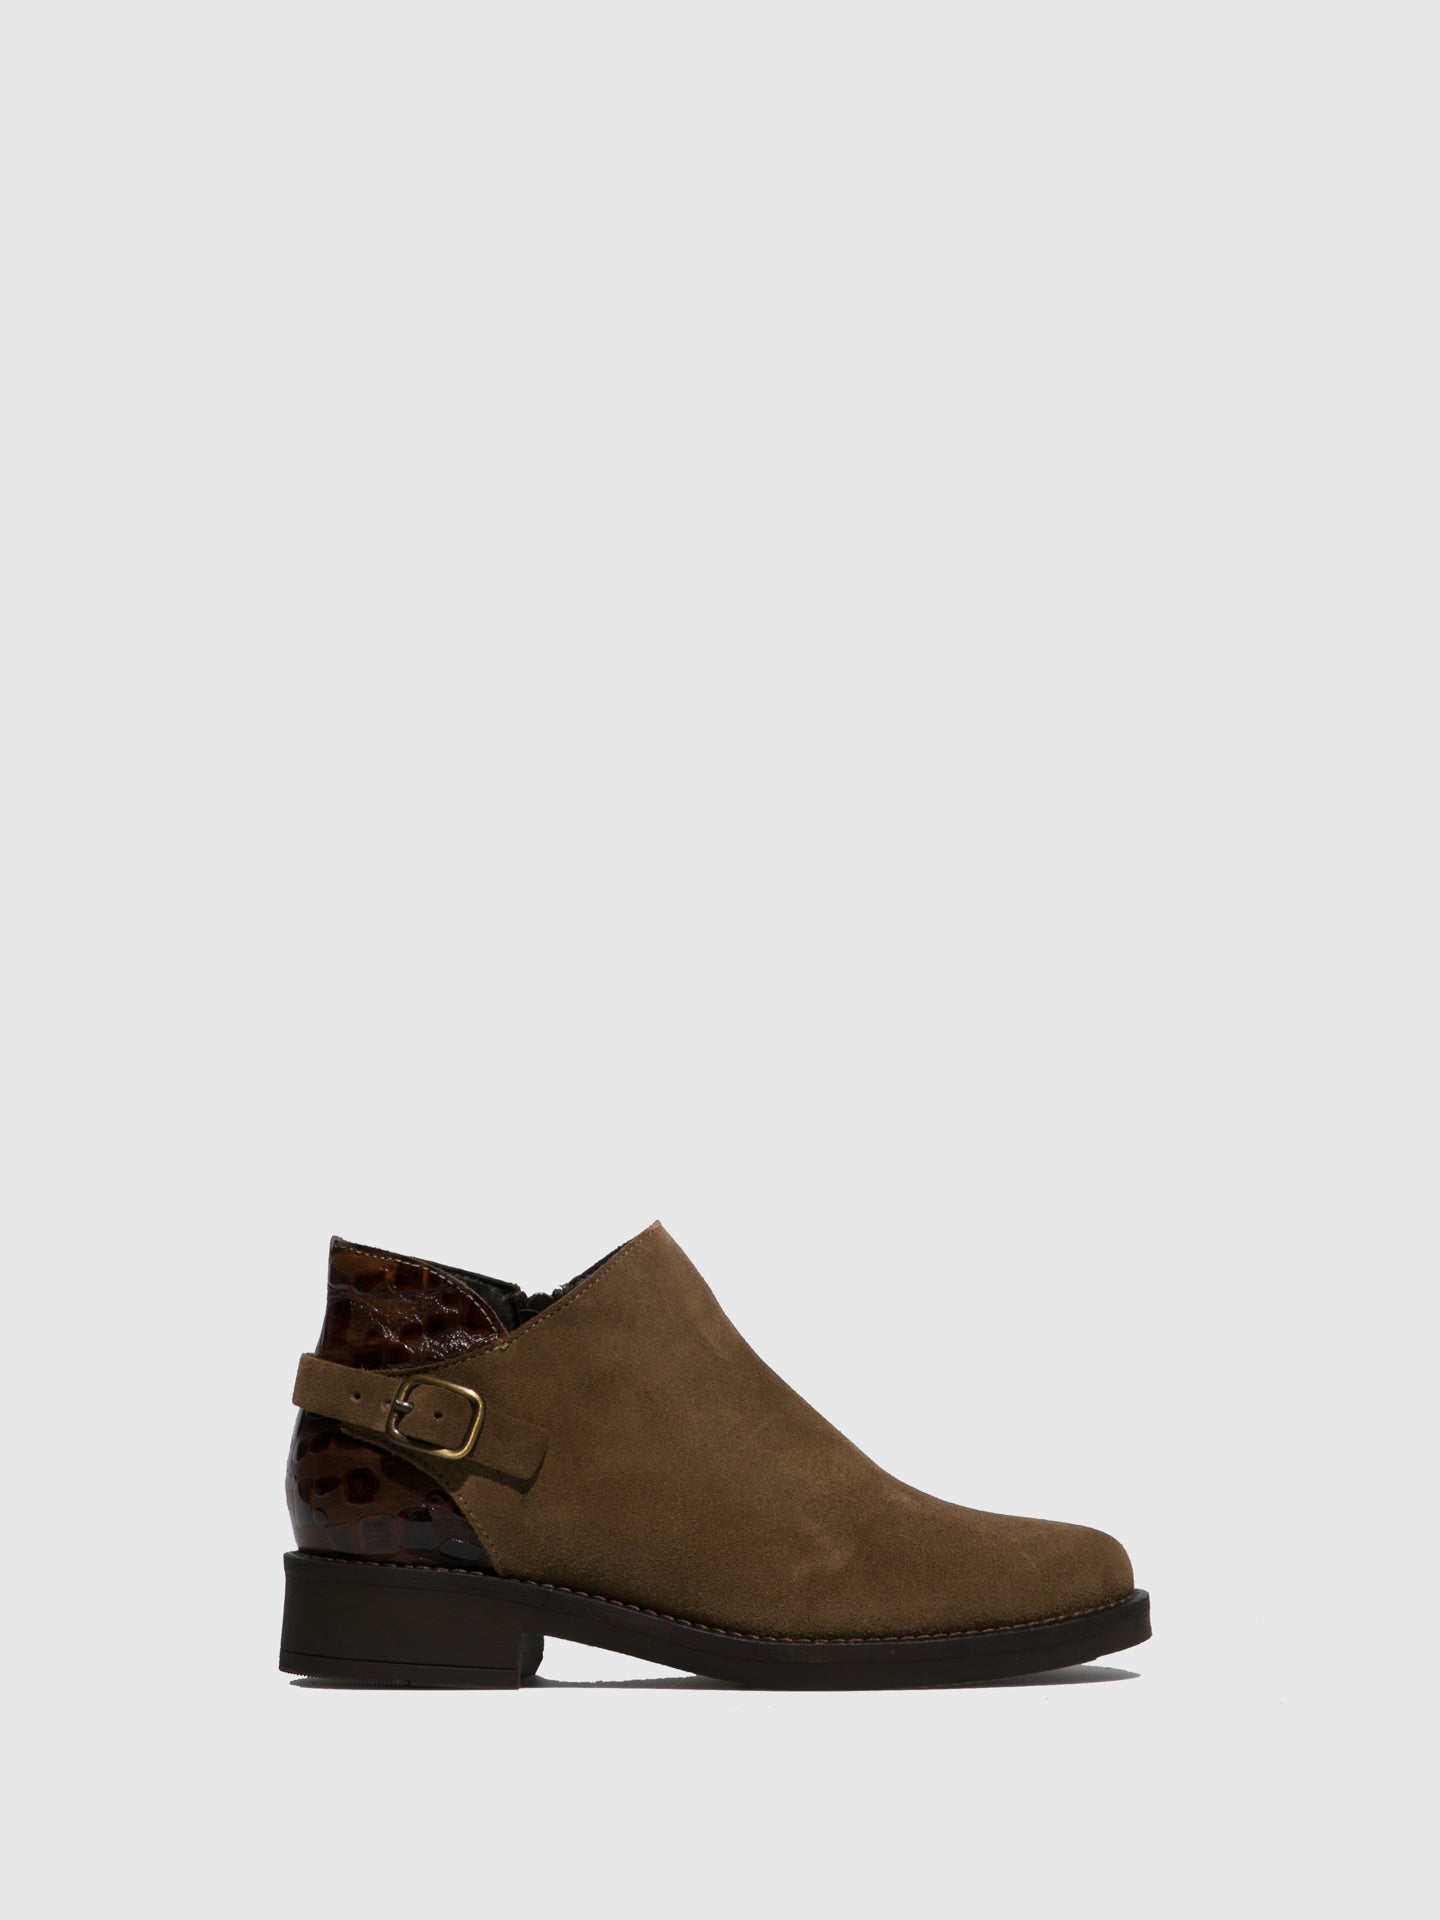 Foreva Tan Buckle Ankle Boots